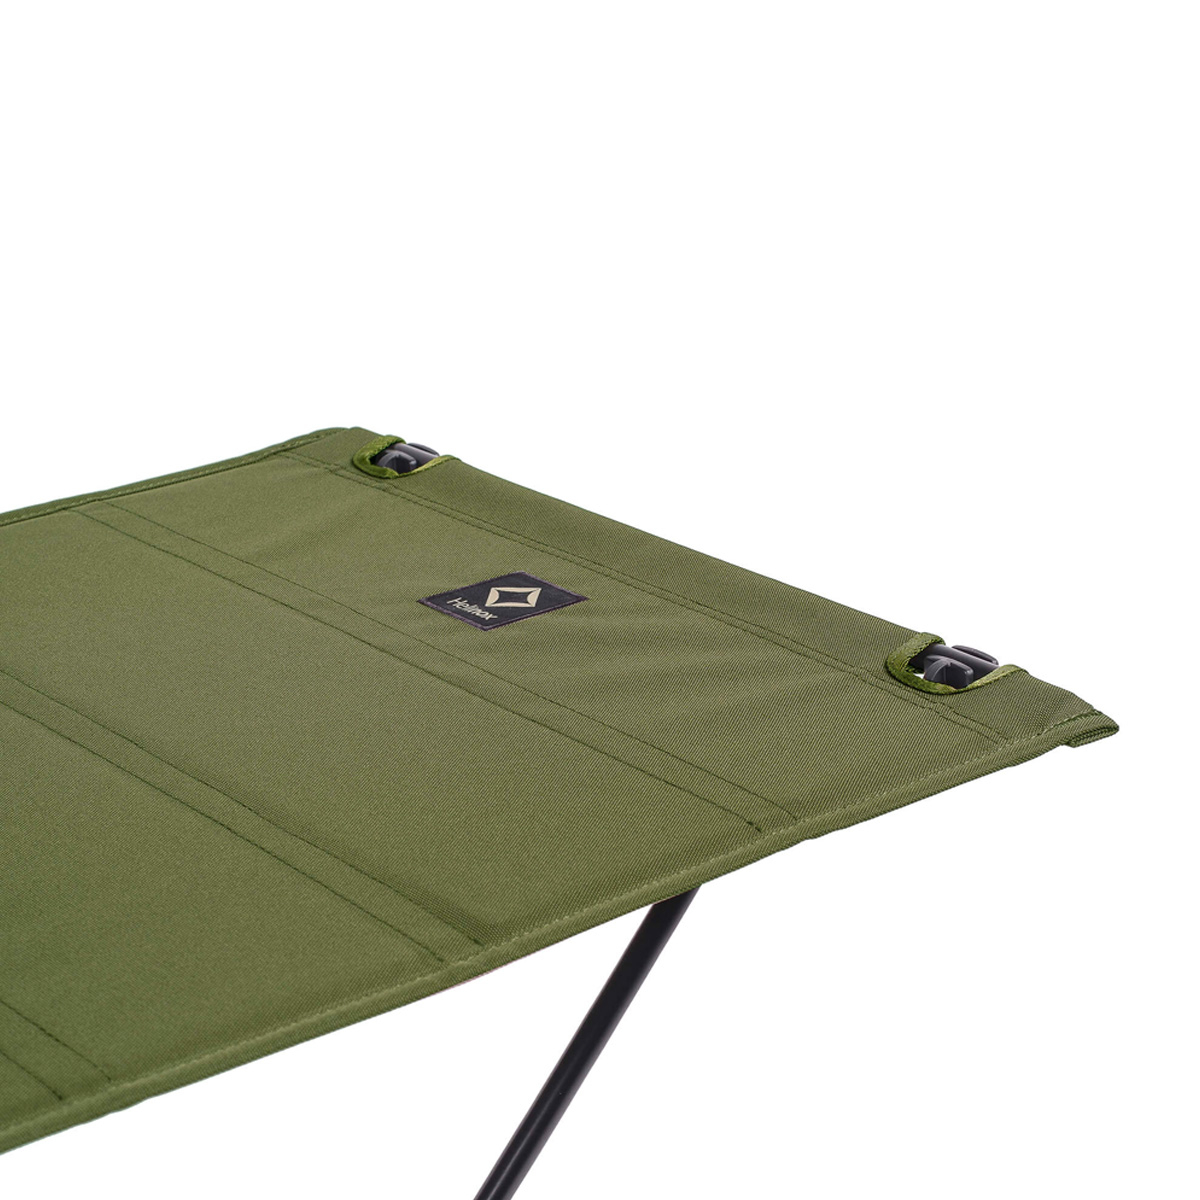 Helinox Tactical Table Regular Military Olive fabric, bluesign®-certified and recycled 600D polyester